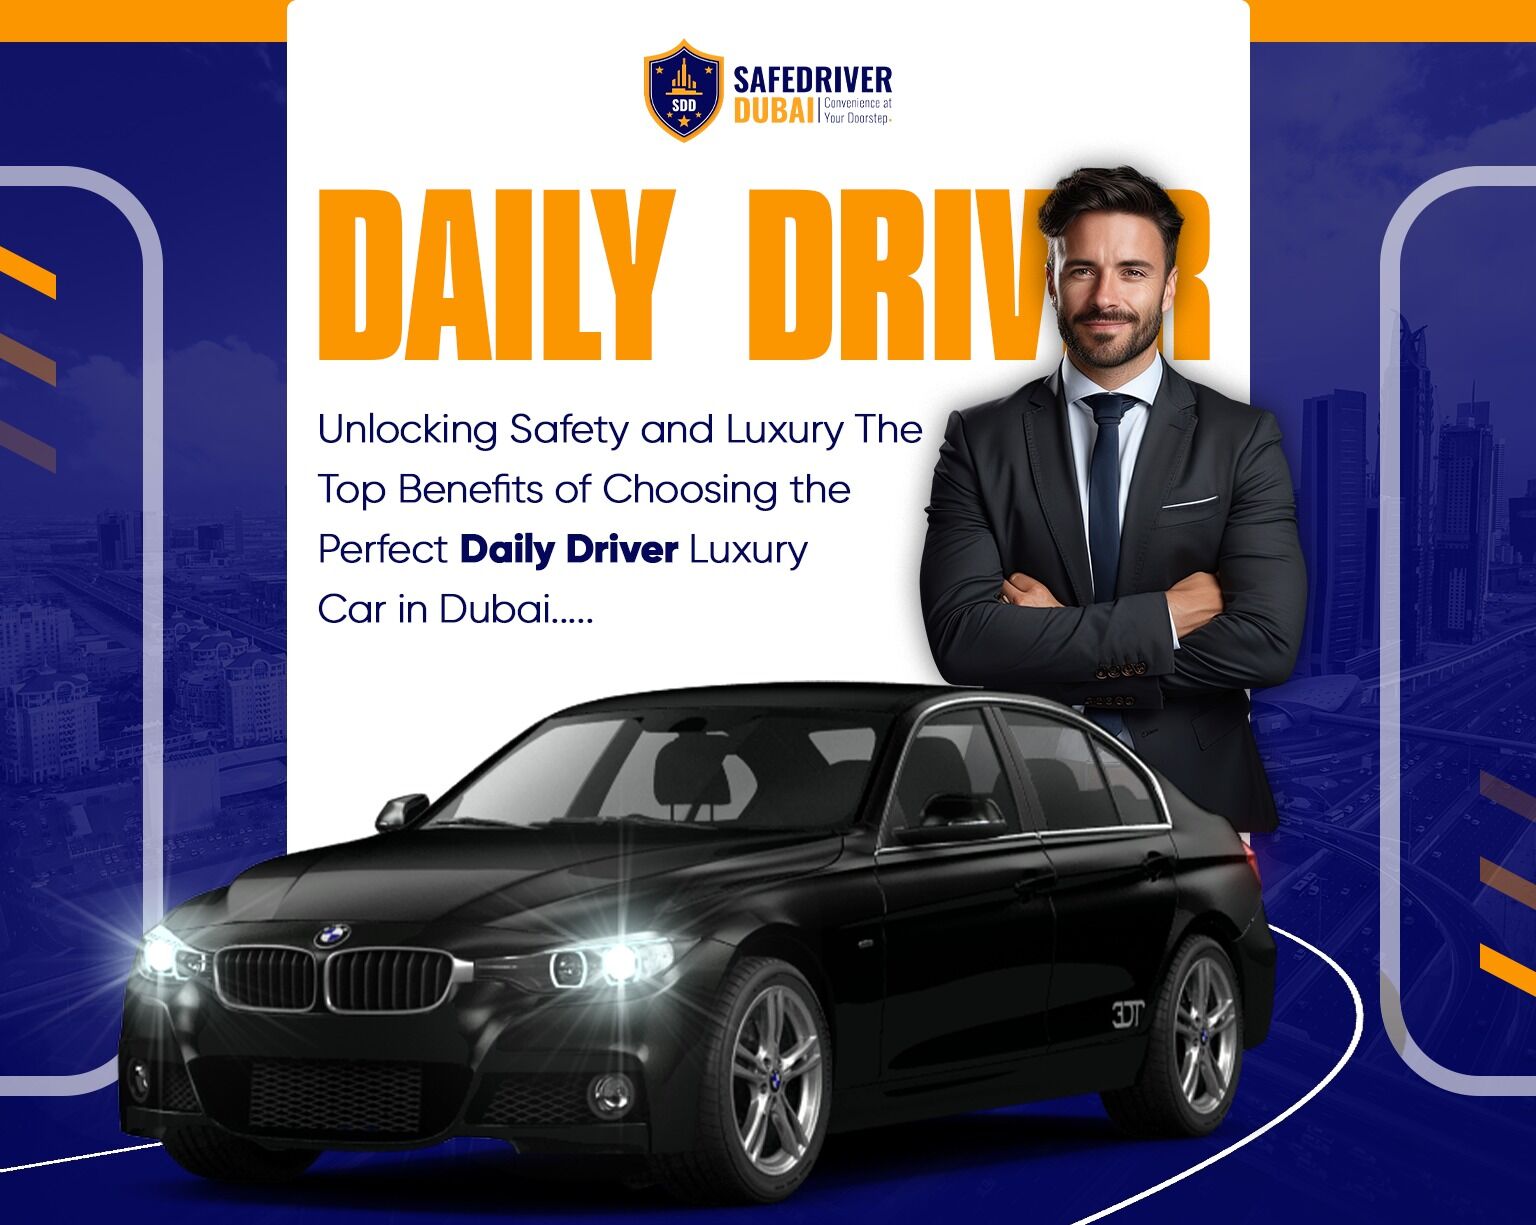 Unlocking-Safety-and-Luxury-The-Top-Benefits-of-Choosing-the-Perfect-Daily-Driver-Luxury-Car-in-Dubai